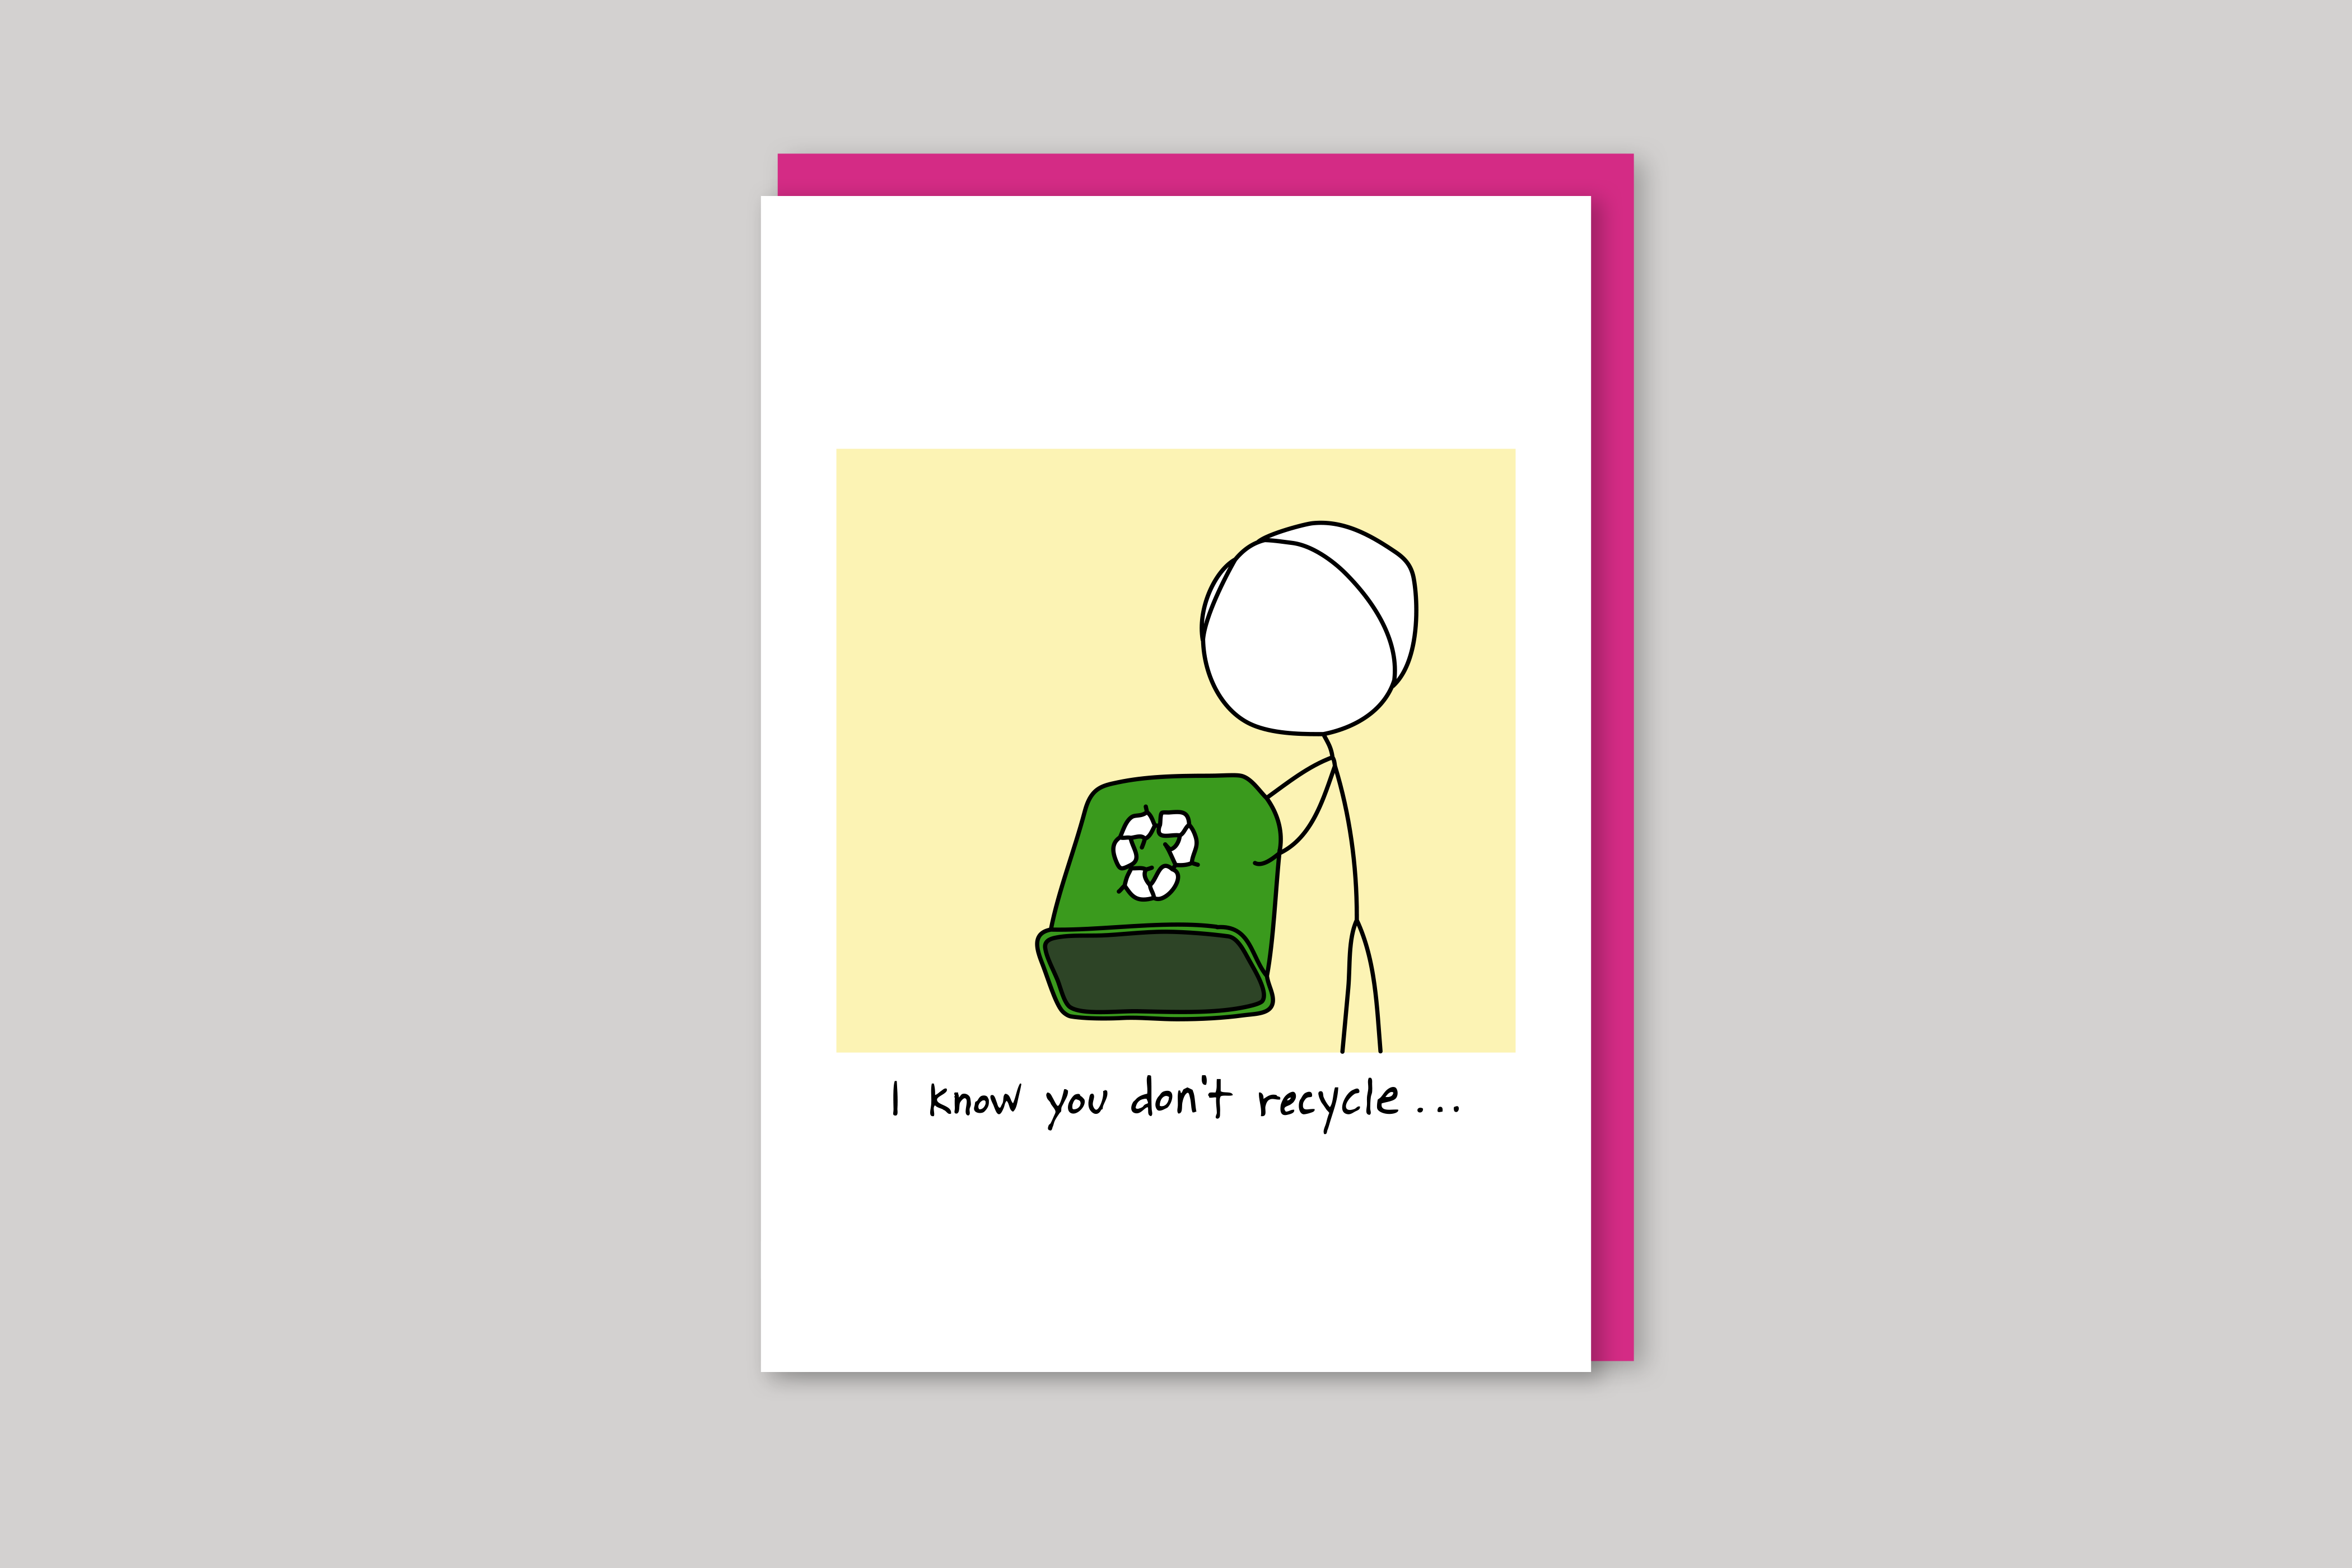 You Don't Recycle humorous illustration from Mean Cards range of greeting cards by Icon, back page.